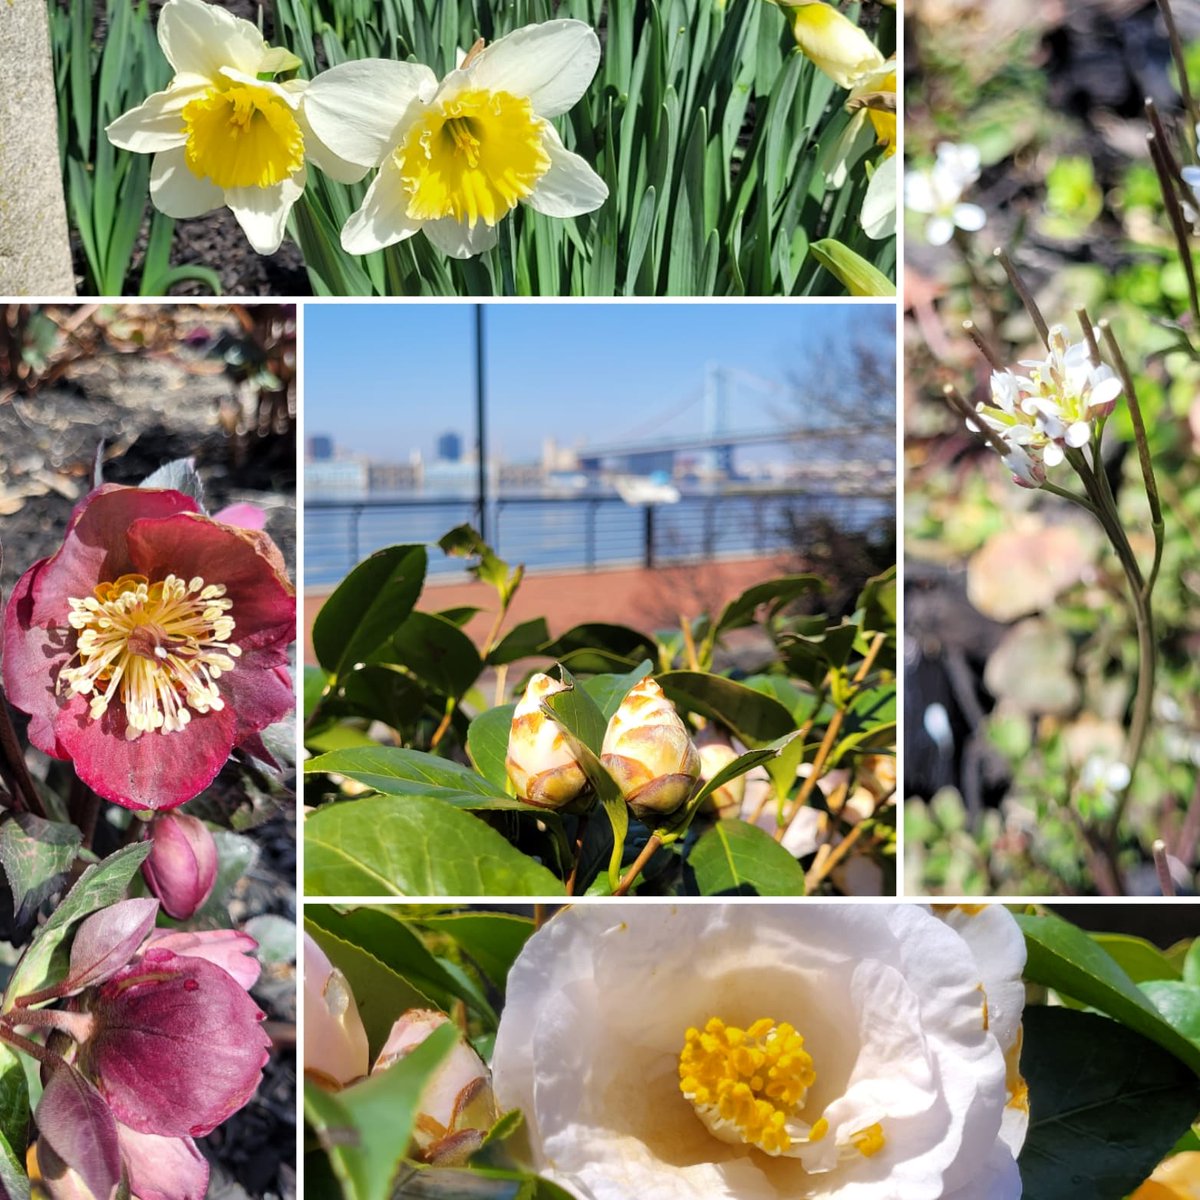 Blossoms are in Bloom at the Camden Waterfront. Happy Spring! #spring #flowers #camdenwaterfront #benfranklinbridge #centerforaquaticsciences